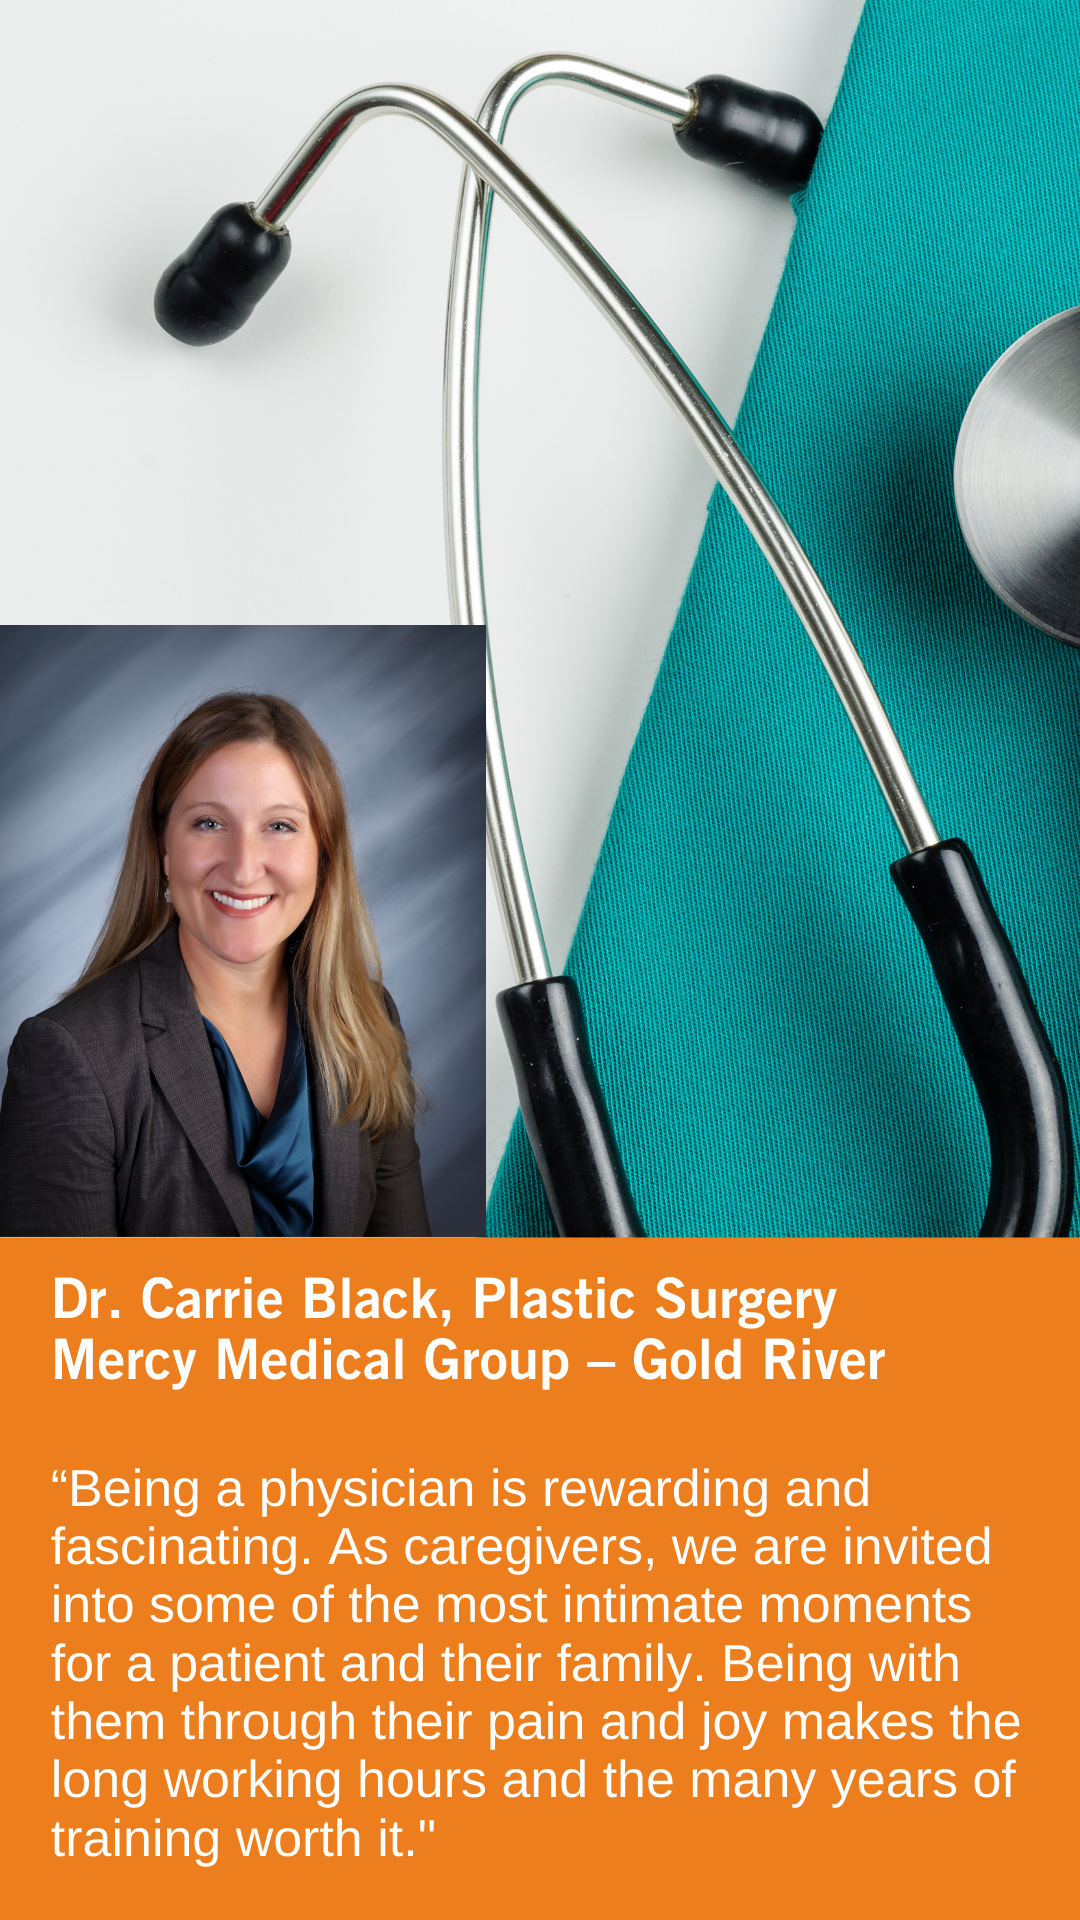 Carrie Black, MD, Cosmetic, Plastic & Reconstructive Surgery, Mercy Medical Group